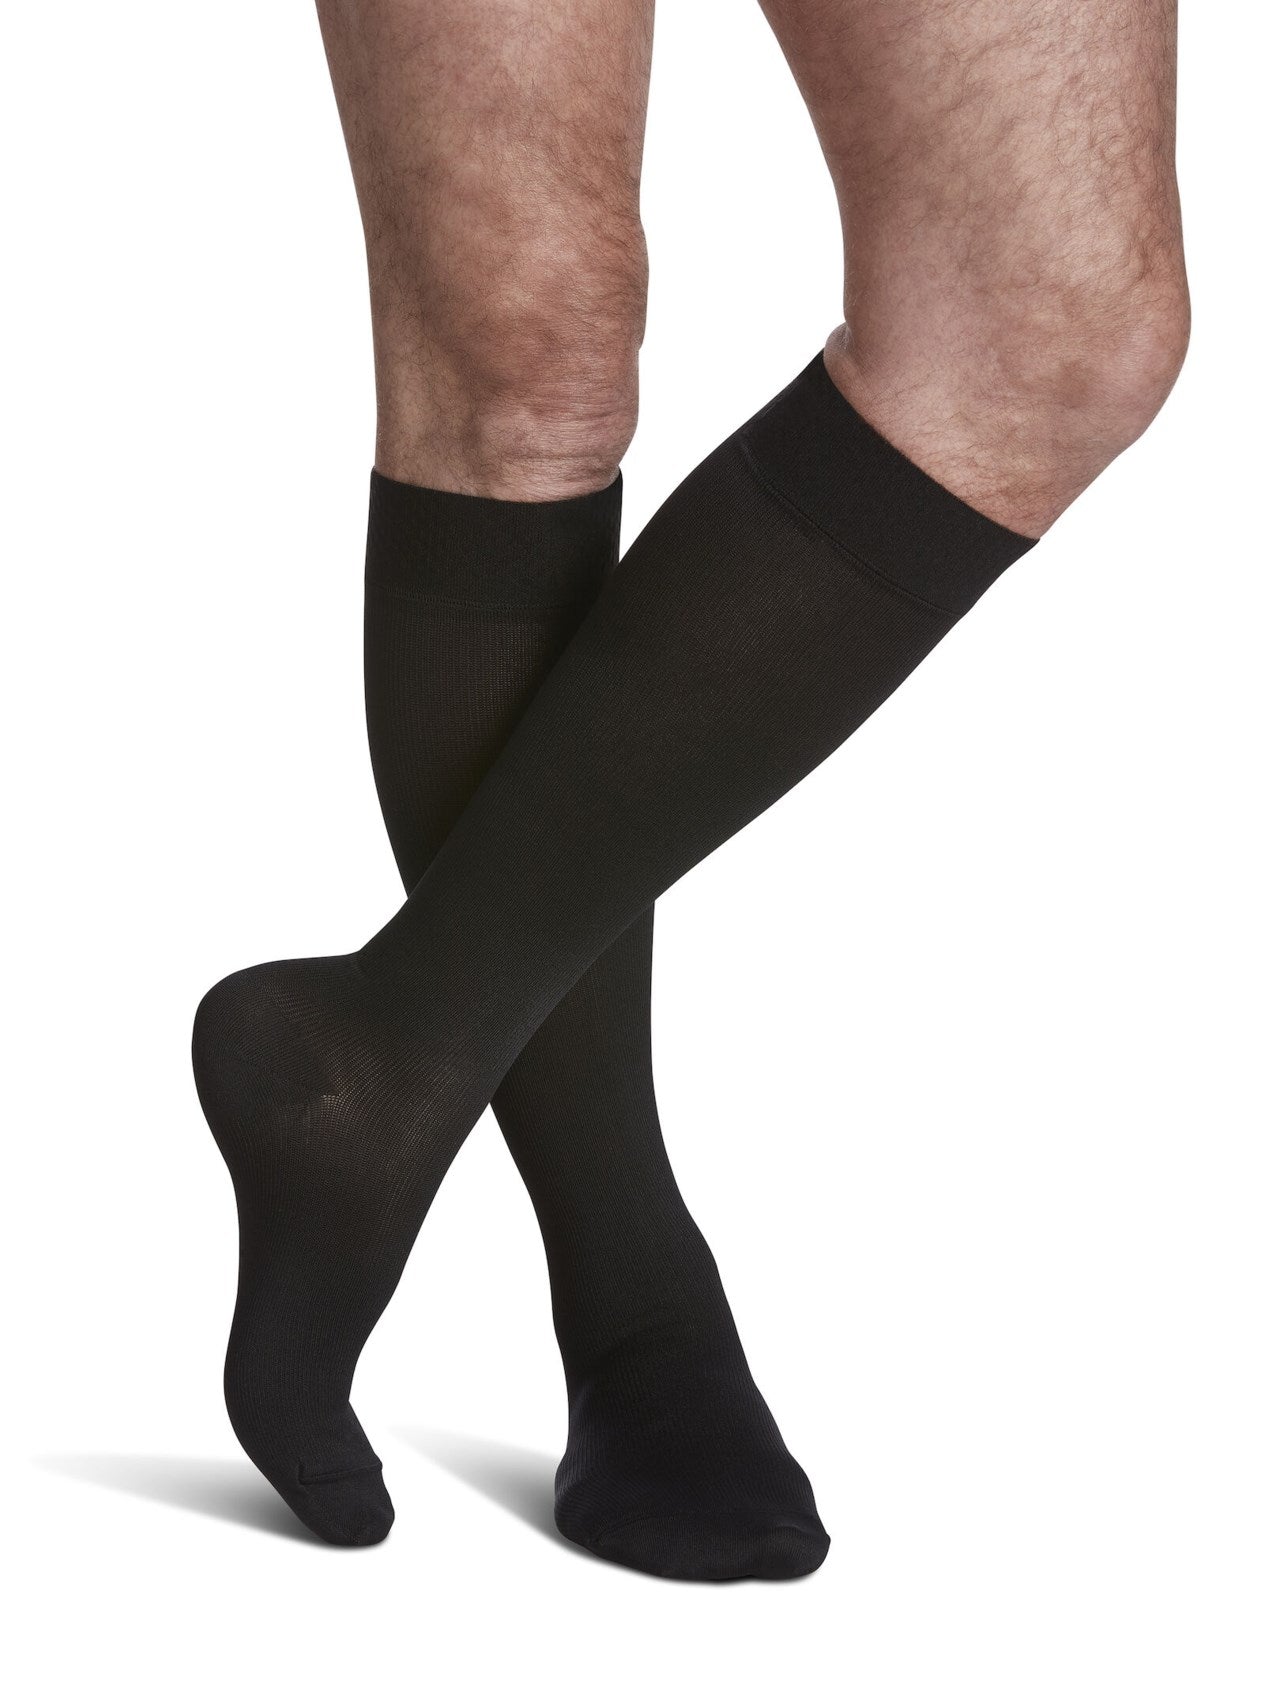 Sigvaris 820 Microfiber Compression Socks 30-40 mmHg Calf High With Grip Top for Men Closed Toe